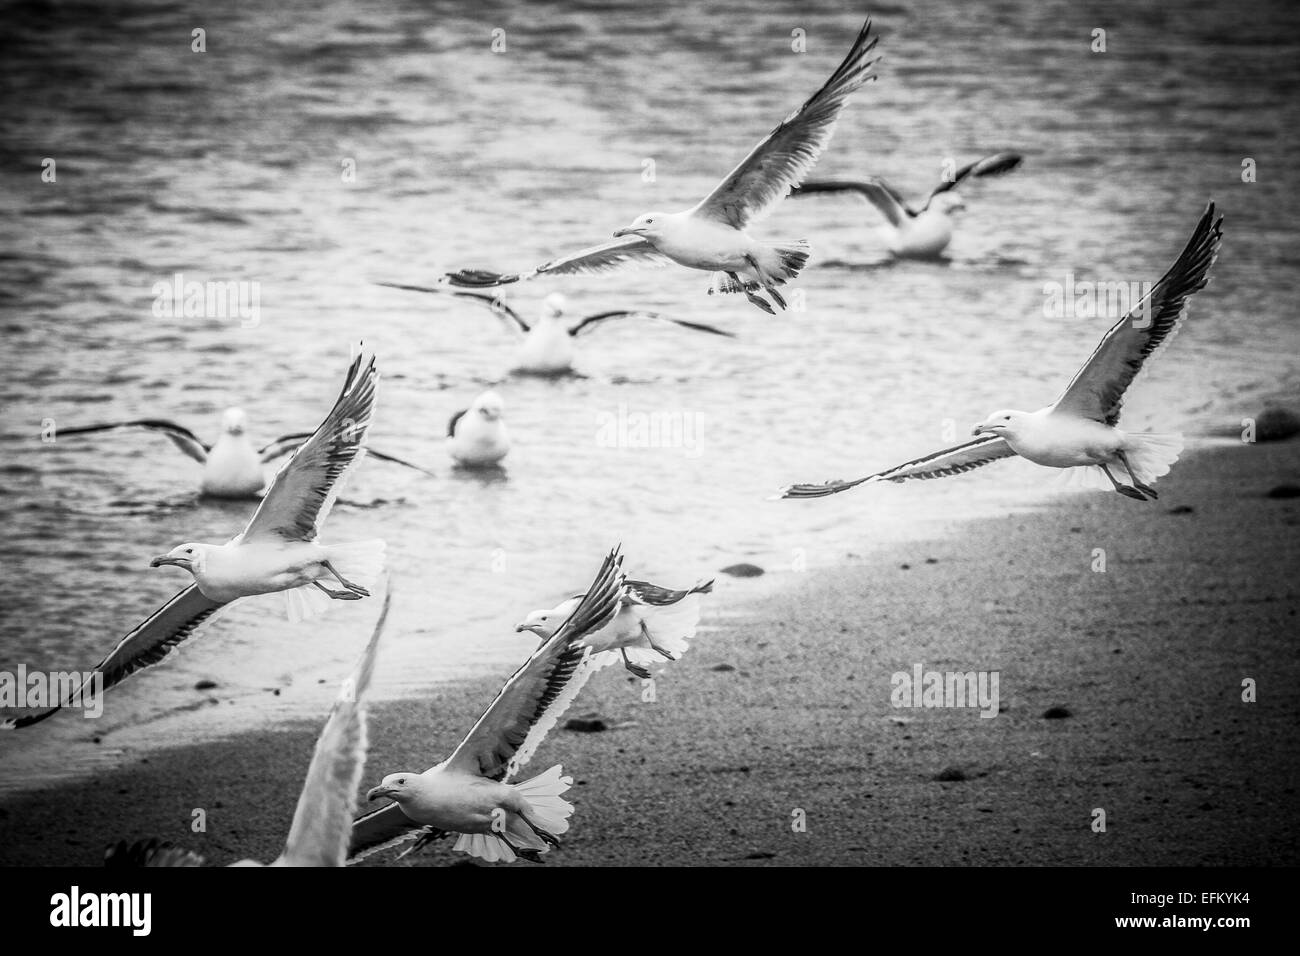 Black and white image of seagulls flying from beach, Isles of Scilly, UK Stock Photo